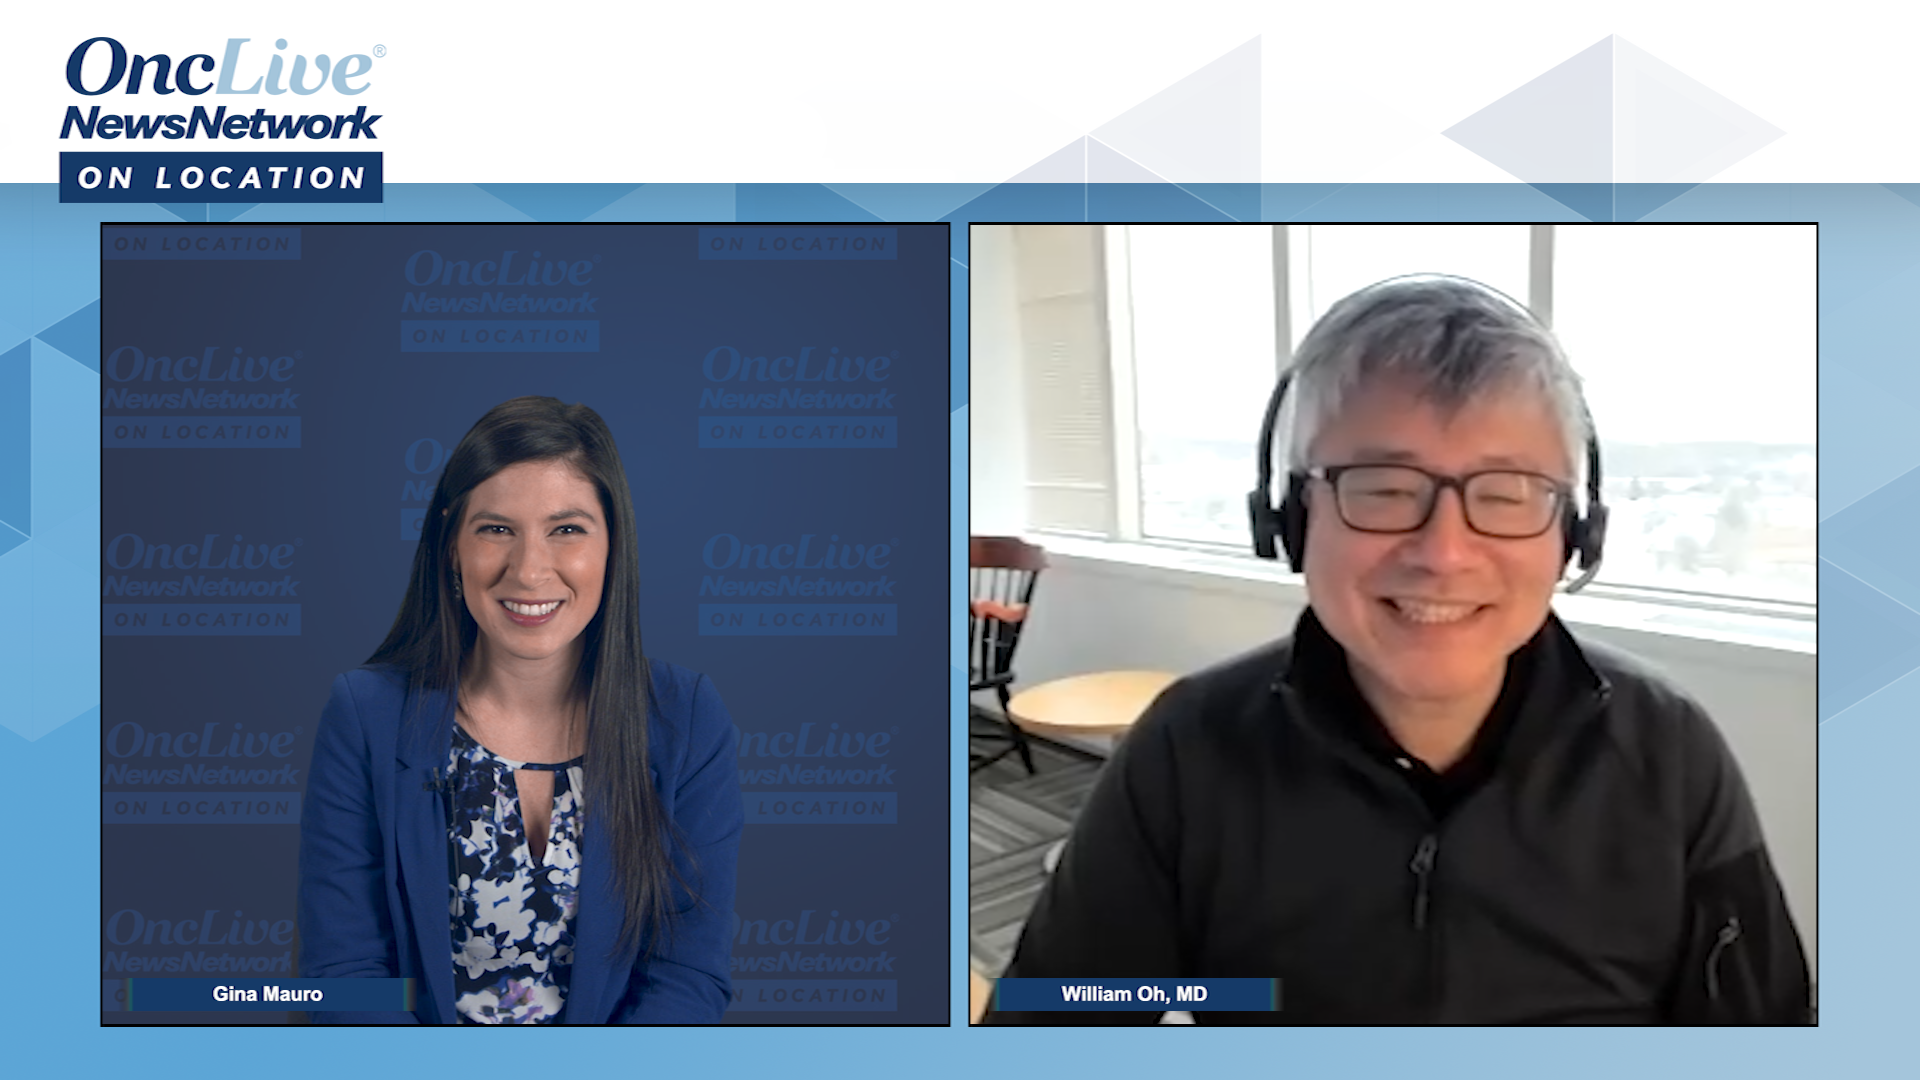 Gina Mauro, OncLive, and William Oh, MD, of Mount Sinai 